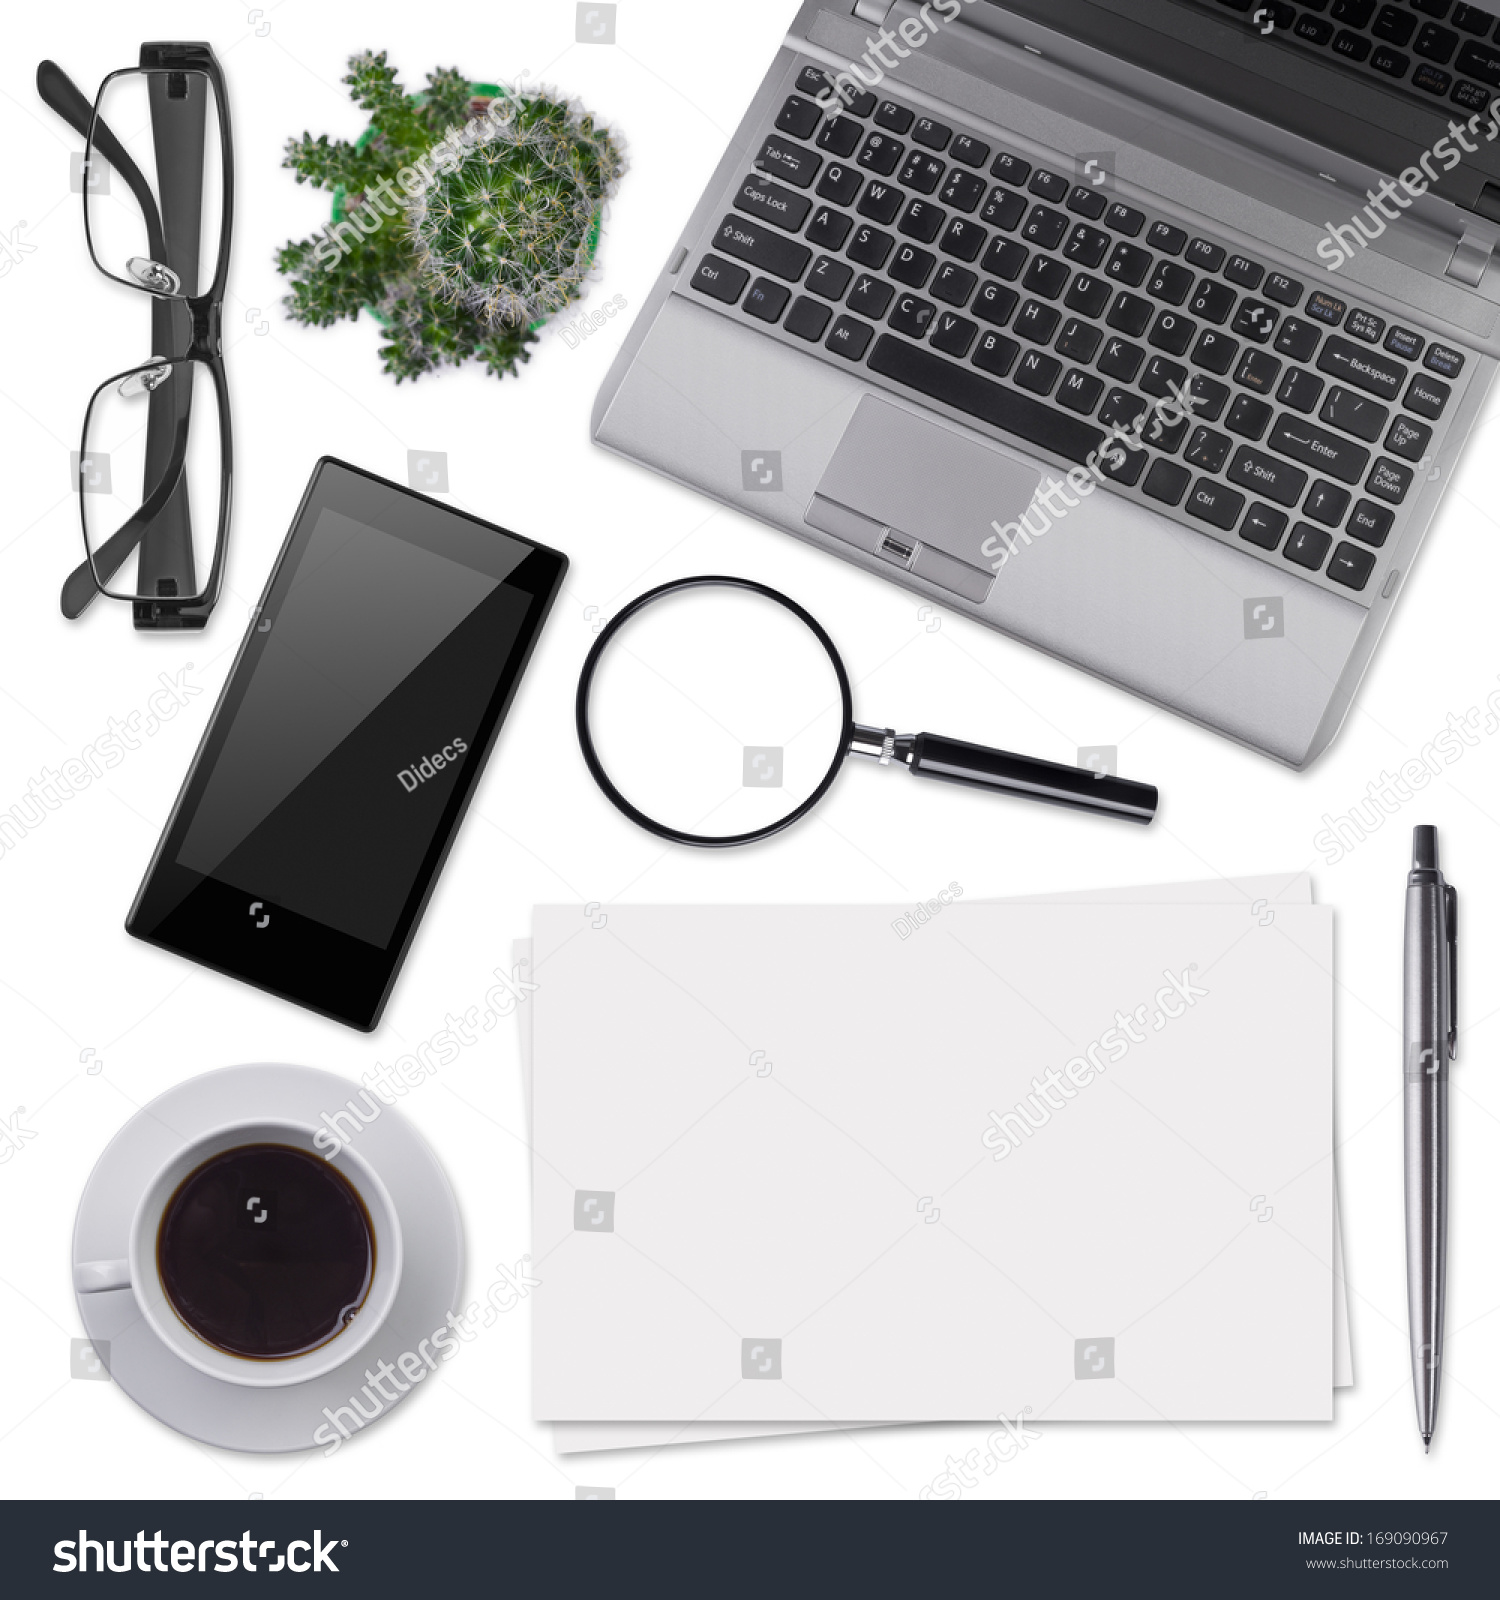 Modern Office Desk Supplies Isolated On Stock Photo Edit Now 169090967